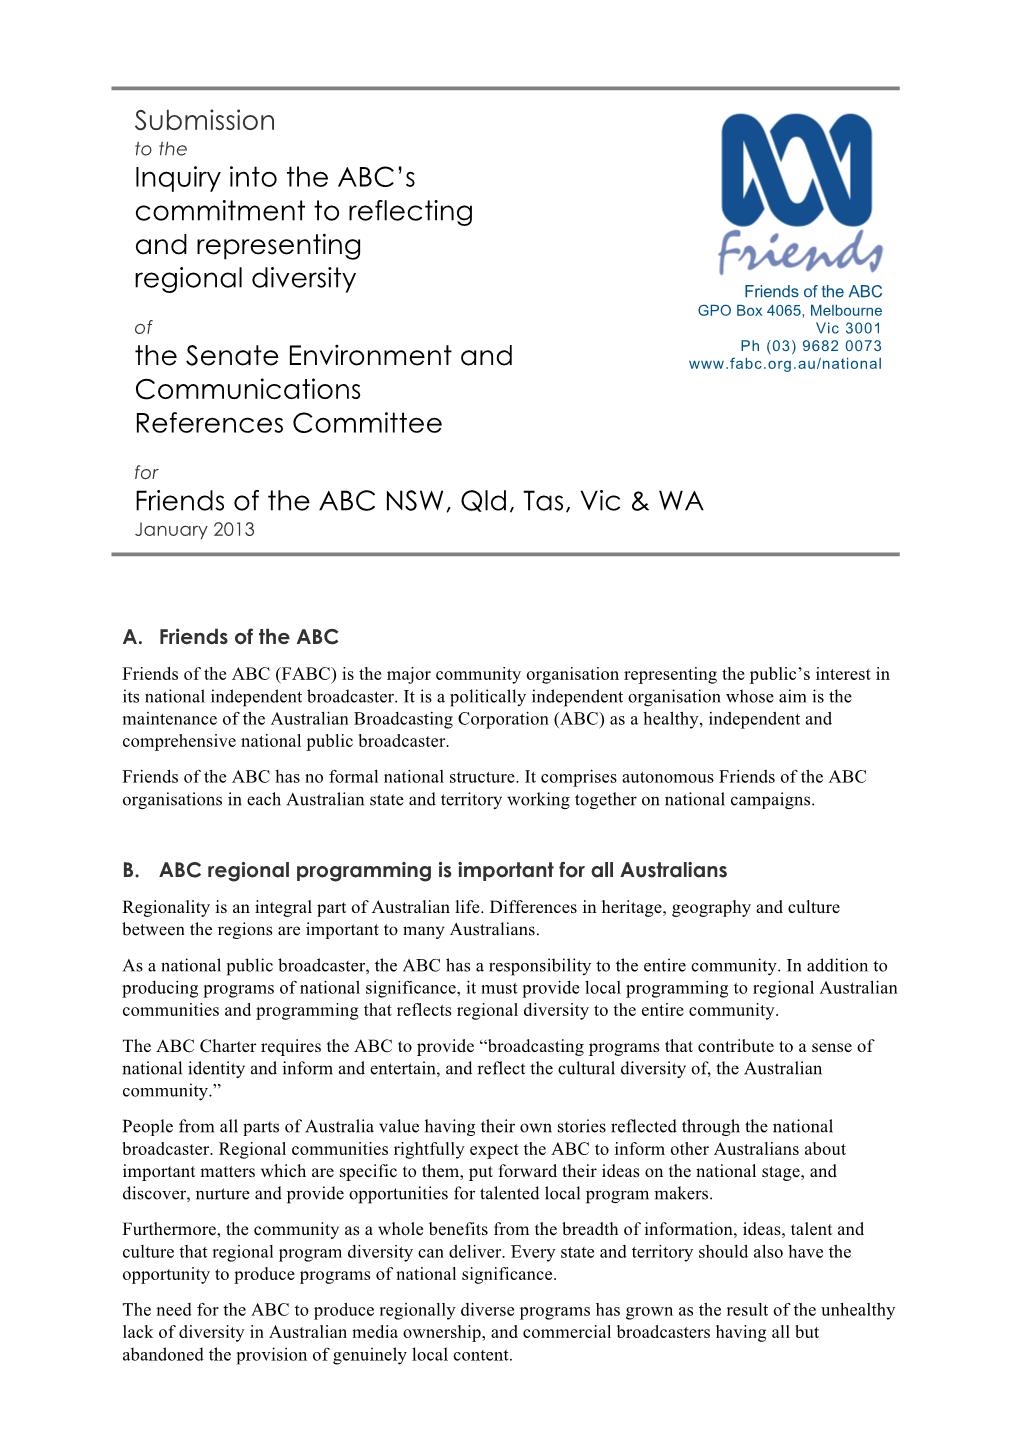 Submission Inquiry Into the ABC's Commitment to Reflecting And